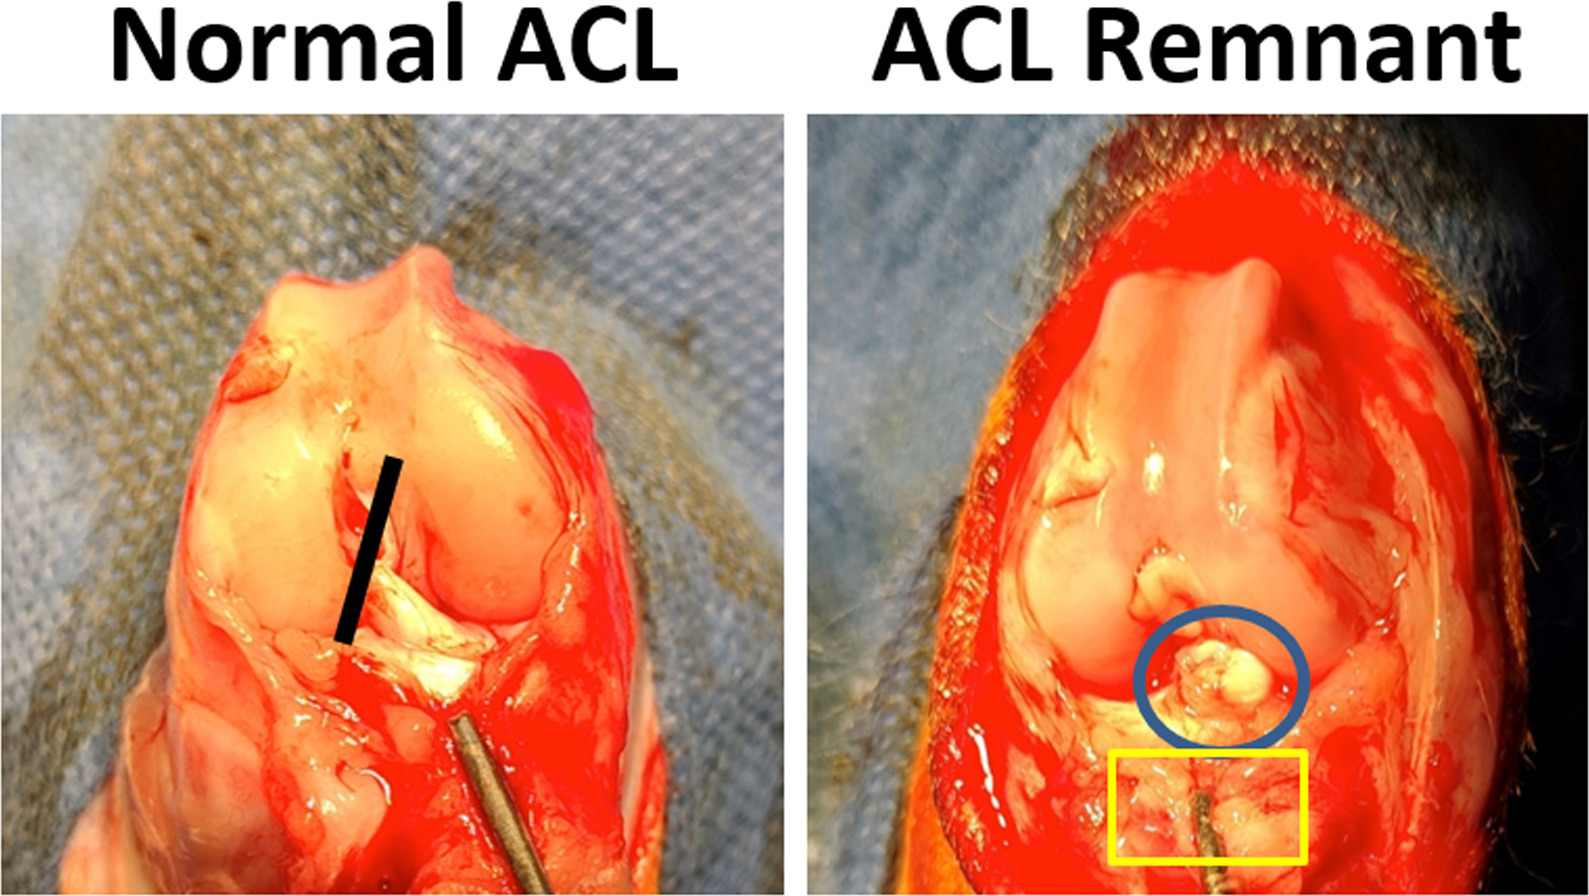 Fig. 1 
            Representative pictures of anterior cruciate ligament (ACL) remnant harvest. The ACL was detached from the femoral insertion (black line) to create the ACL complete tear model (left panel). Four weeks later, the rabbit’s ACL remnant (blue circle) and proximal tibia (yellow frame) were harvested for further ACL remnant cell (ACLRC) and bone marrow cell culture (right panel).
          